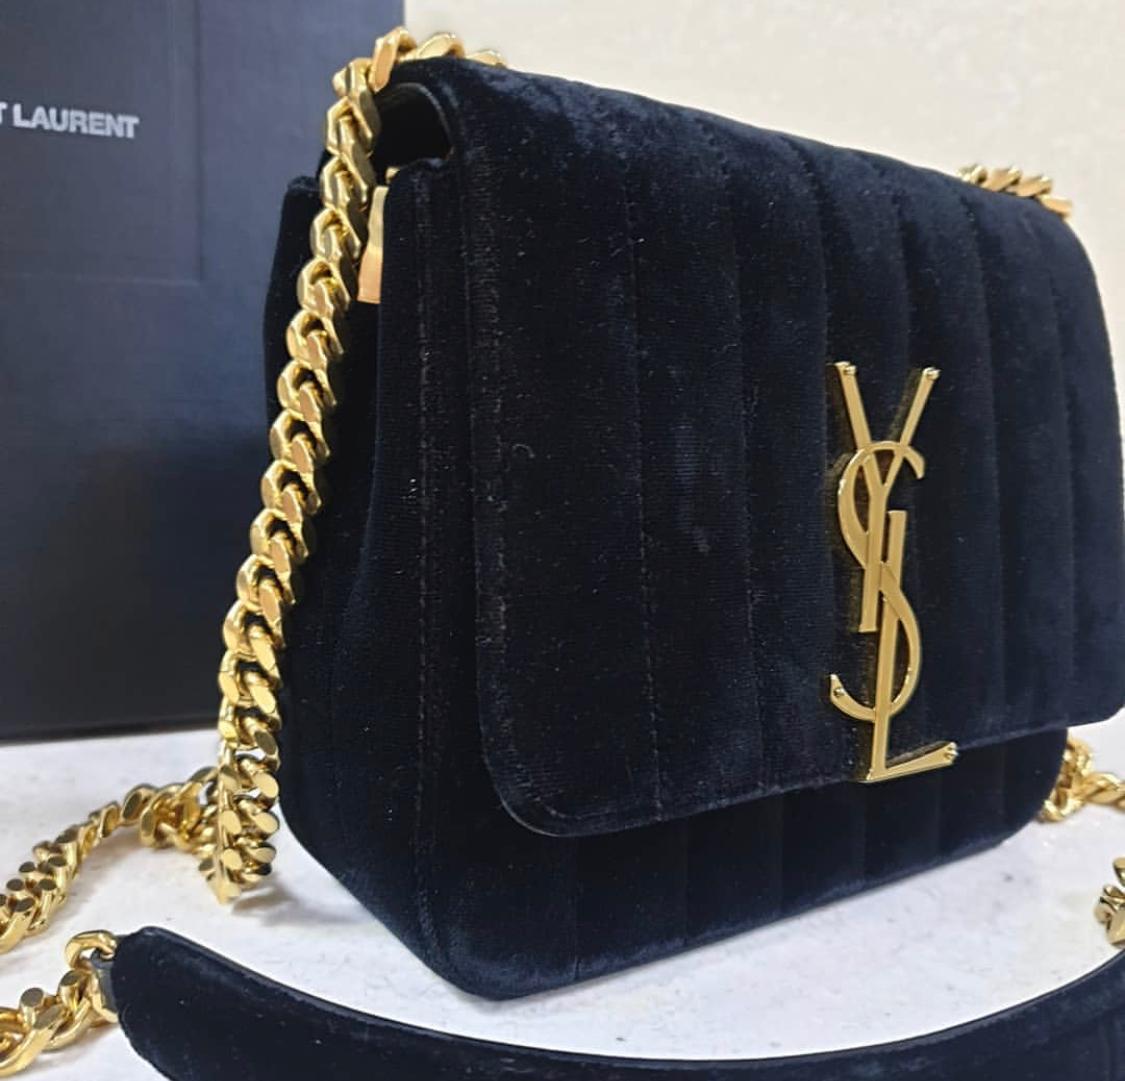 Brand: Saint Laurent

Size: Small (6.75 x 5.75 x 2.75 inch)

(15 * 17 * 7 cm)

Name: Vicky
Color: Black
Style: Crossbody
Material: Velvet

YSL monogram gold metal logo on front

Flap front with magnetic snap closure
Black soft velvet material

21